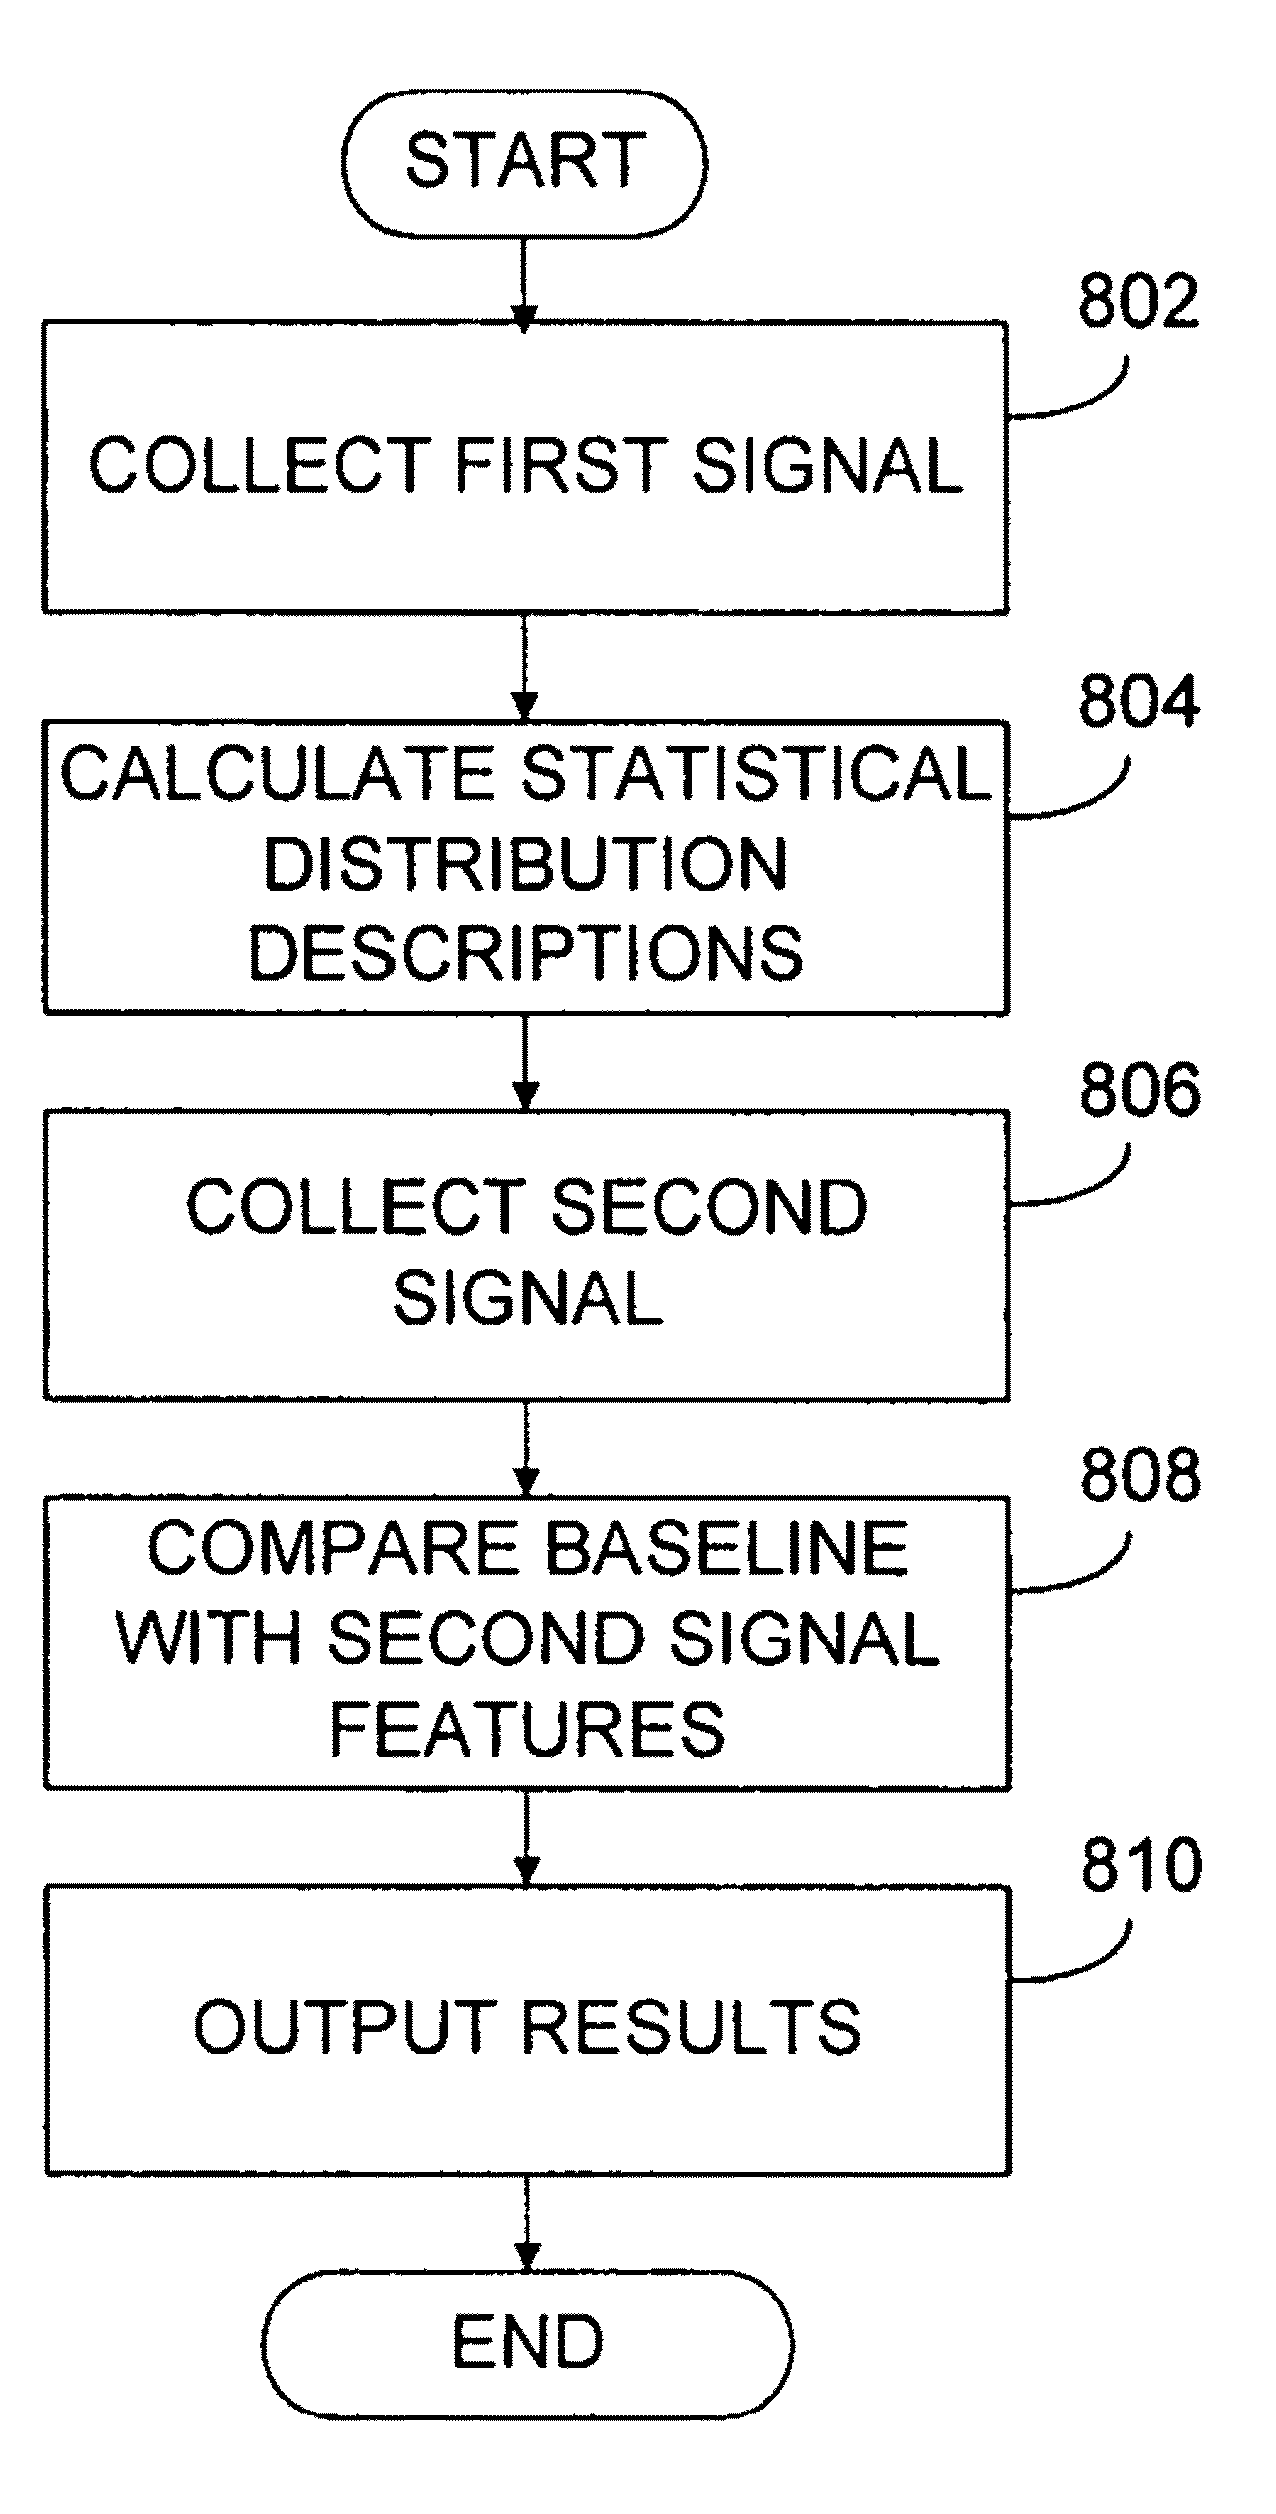 Method for analyzing function of the brain and other complex systems